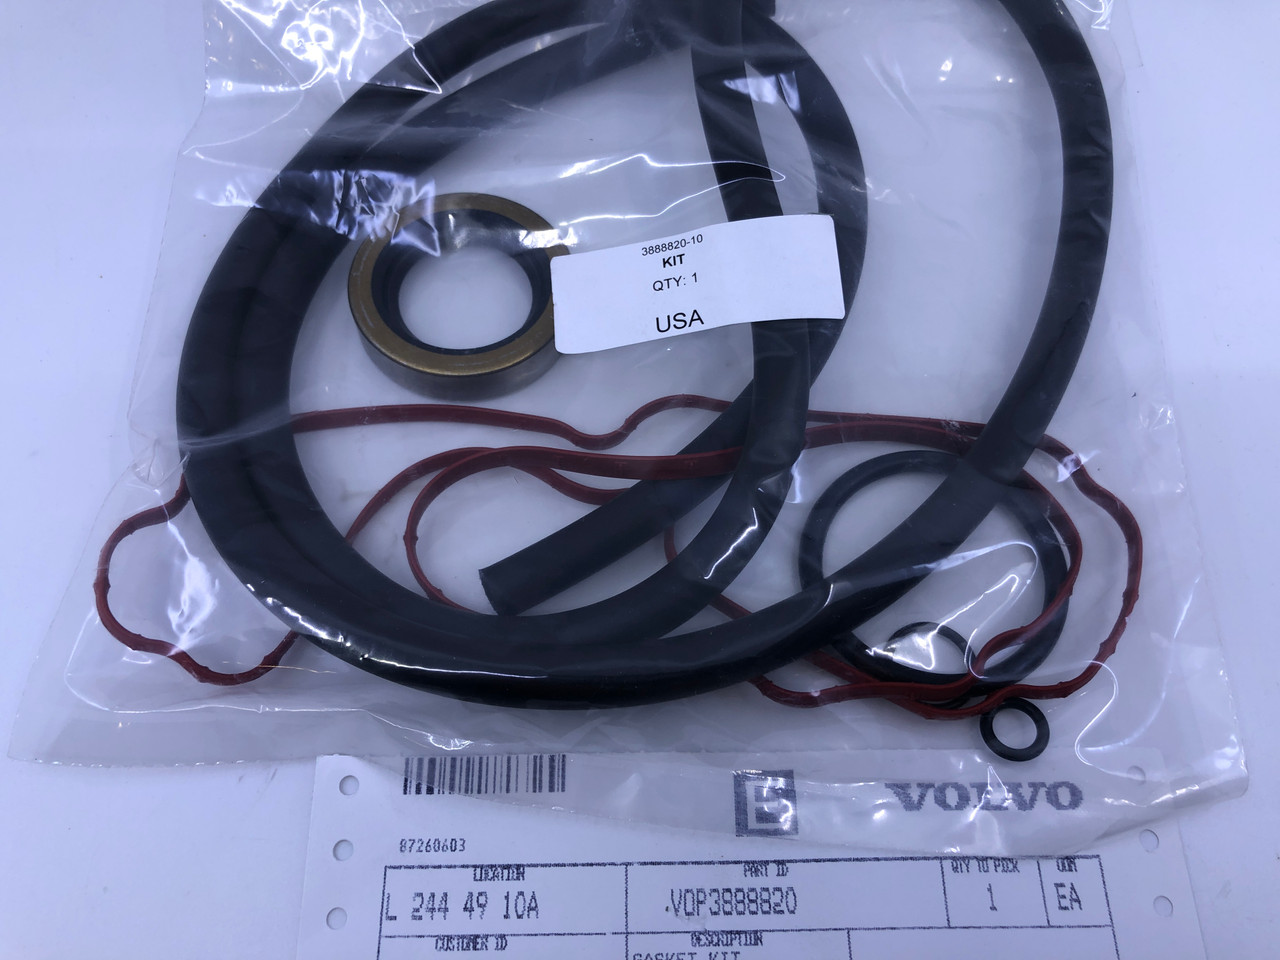 107.99* GENUINE VOLVO no tax* GASKET KIT 3888820 *In Stock & Ready To Ship!